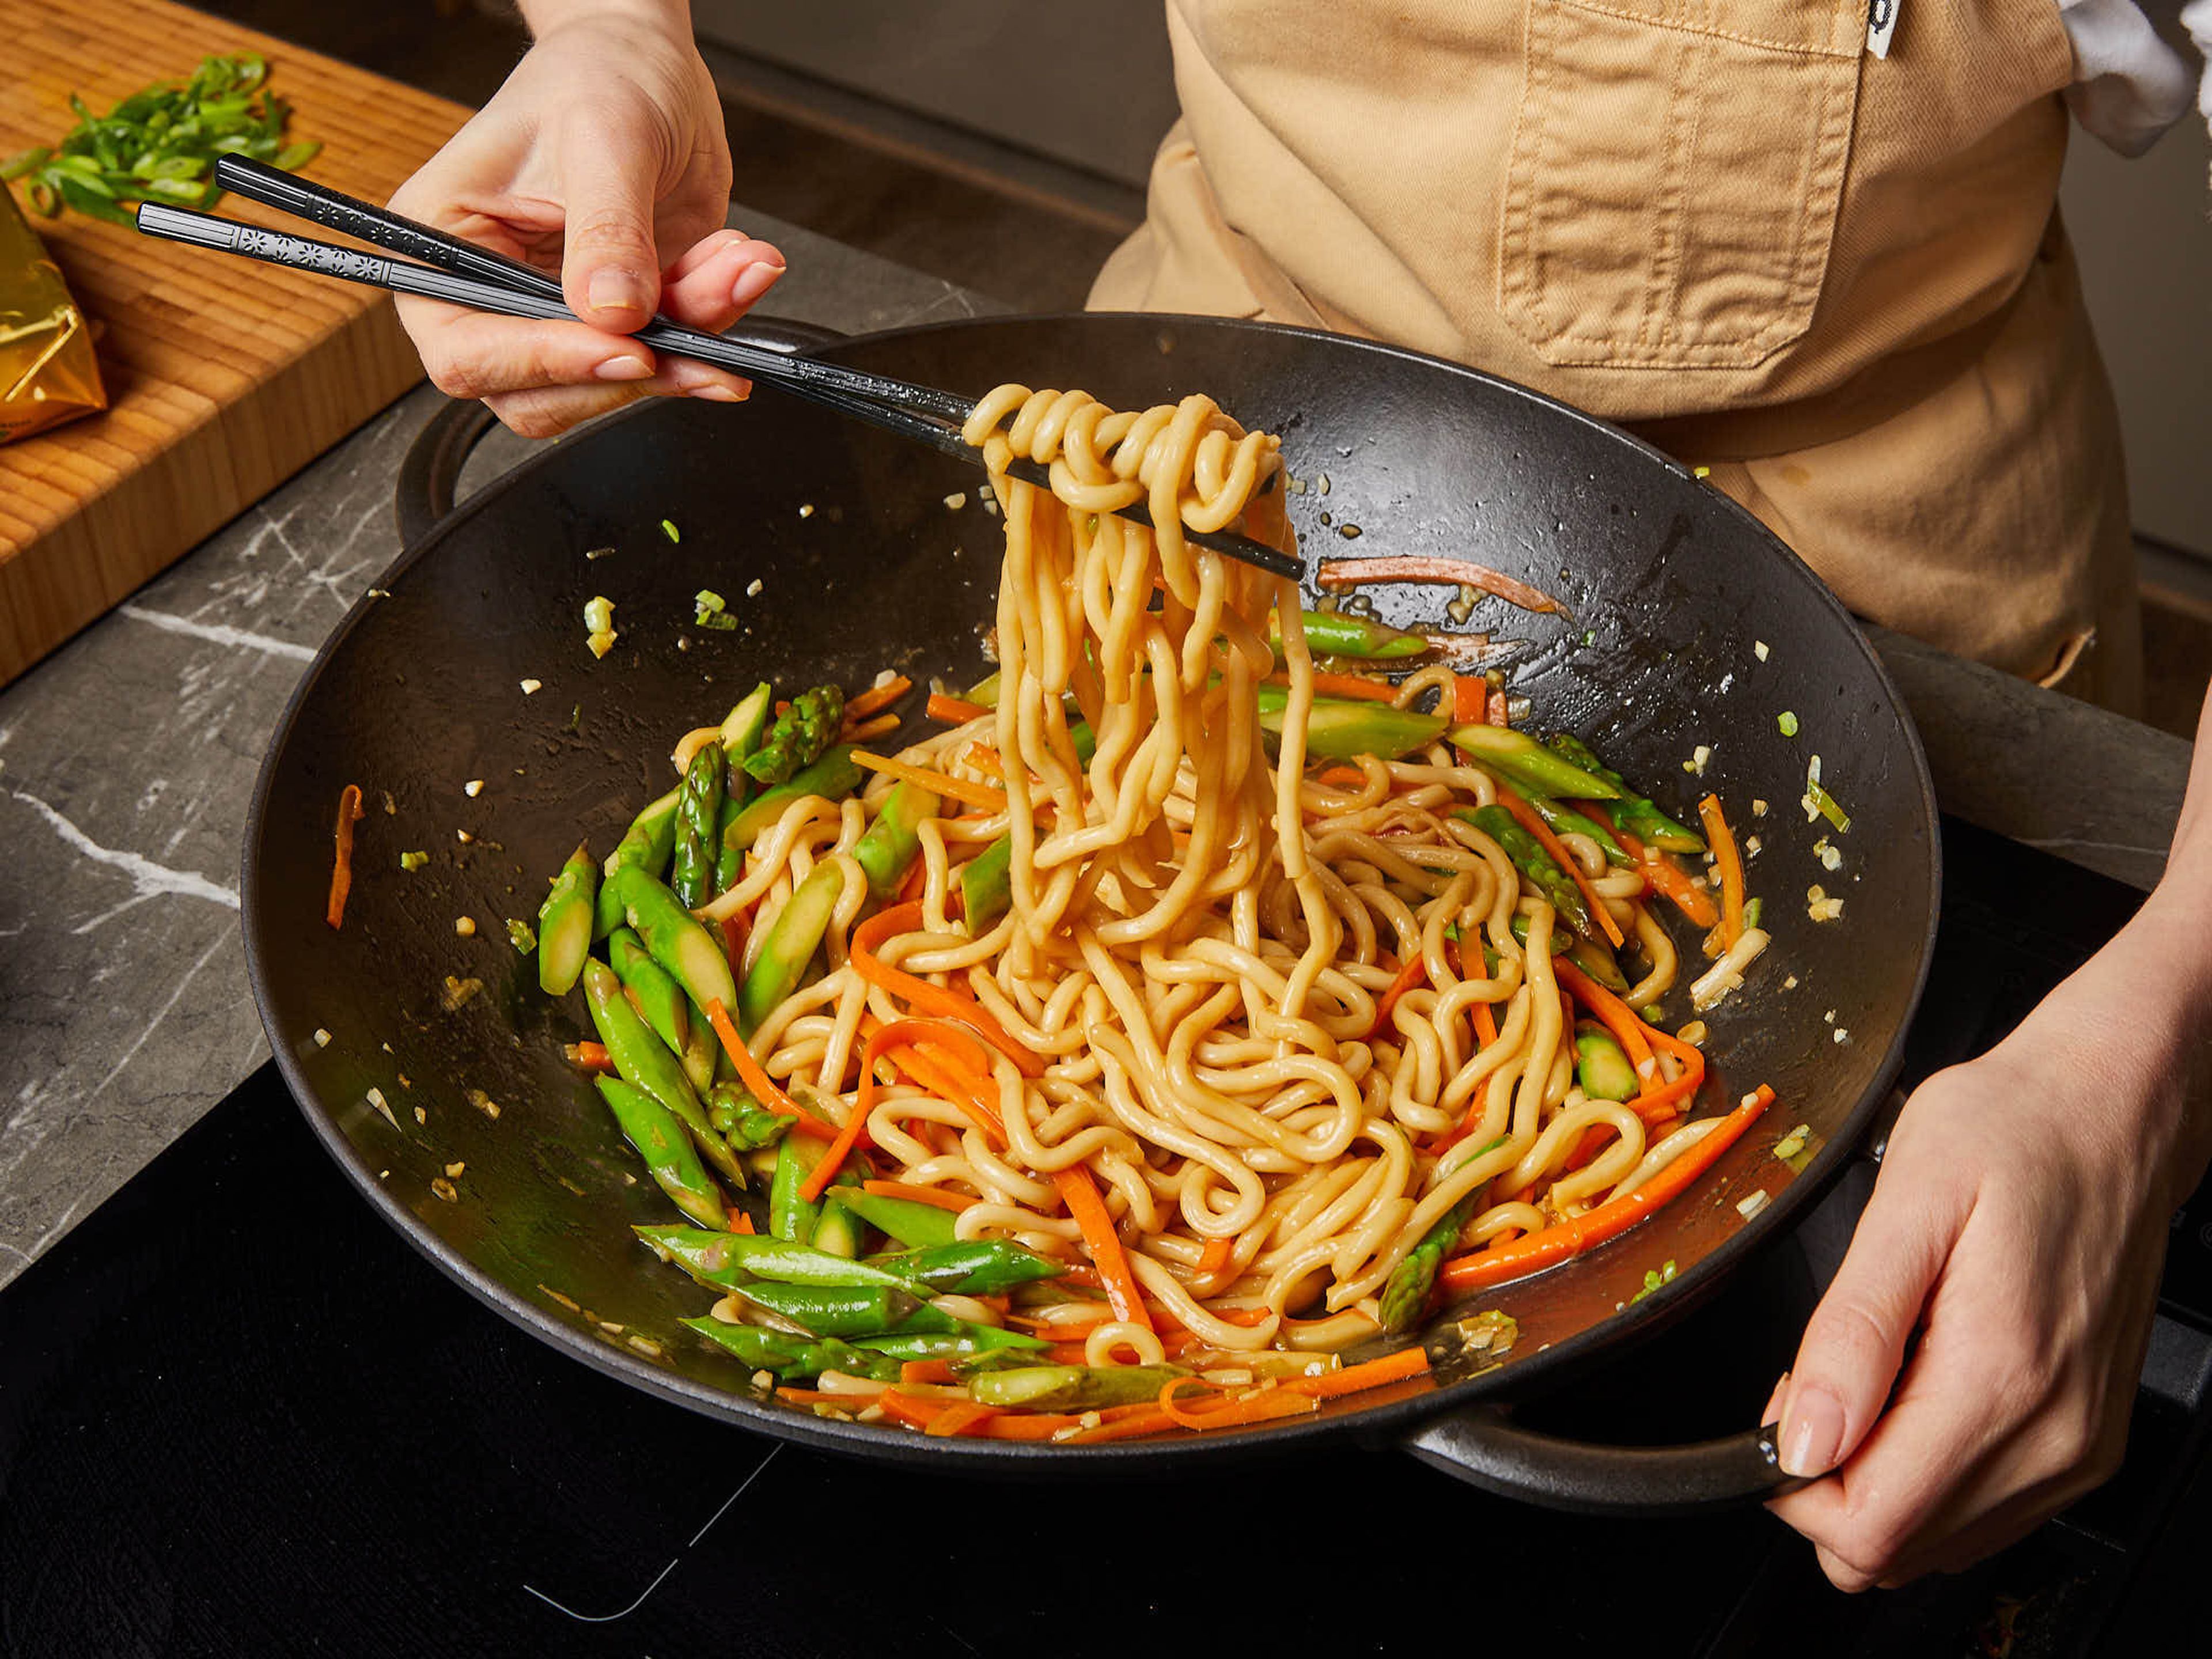 Add the loosened udon noodles and stir-fry for approx. 3 min. Add butter, lemon juice, agave nectar, and soy sauce and mix everything well until it’s all coated with the sauce. Garnish with sesame seeds and green part of the scallion. Serve immediately.